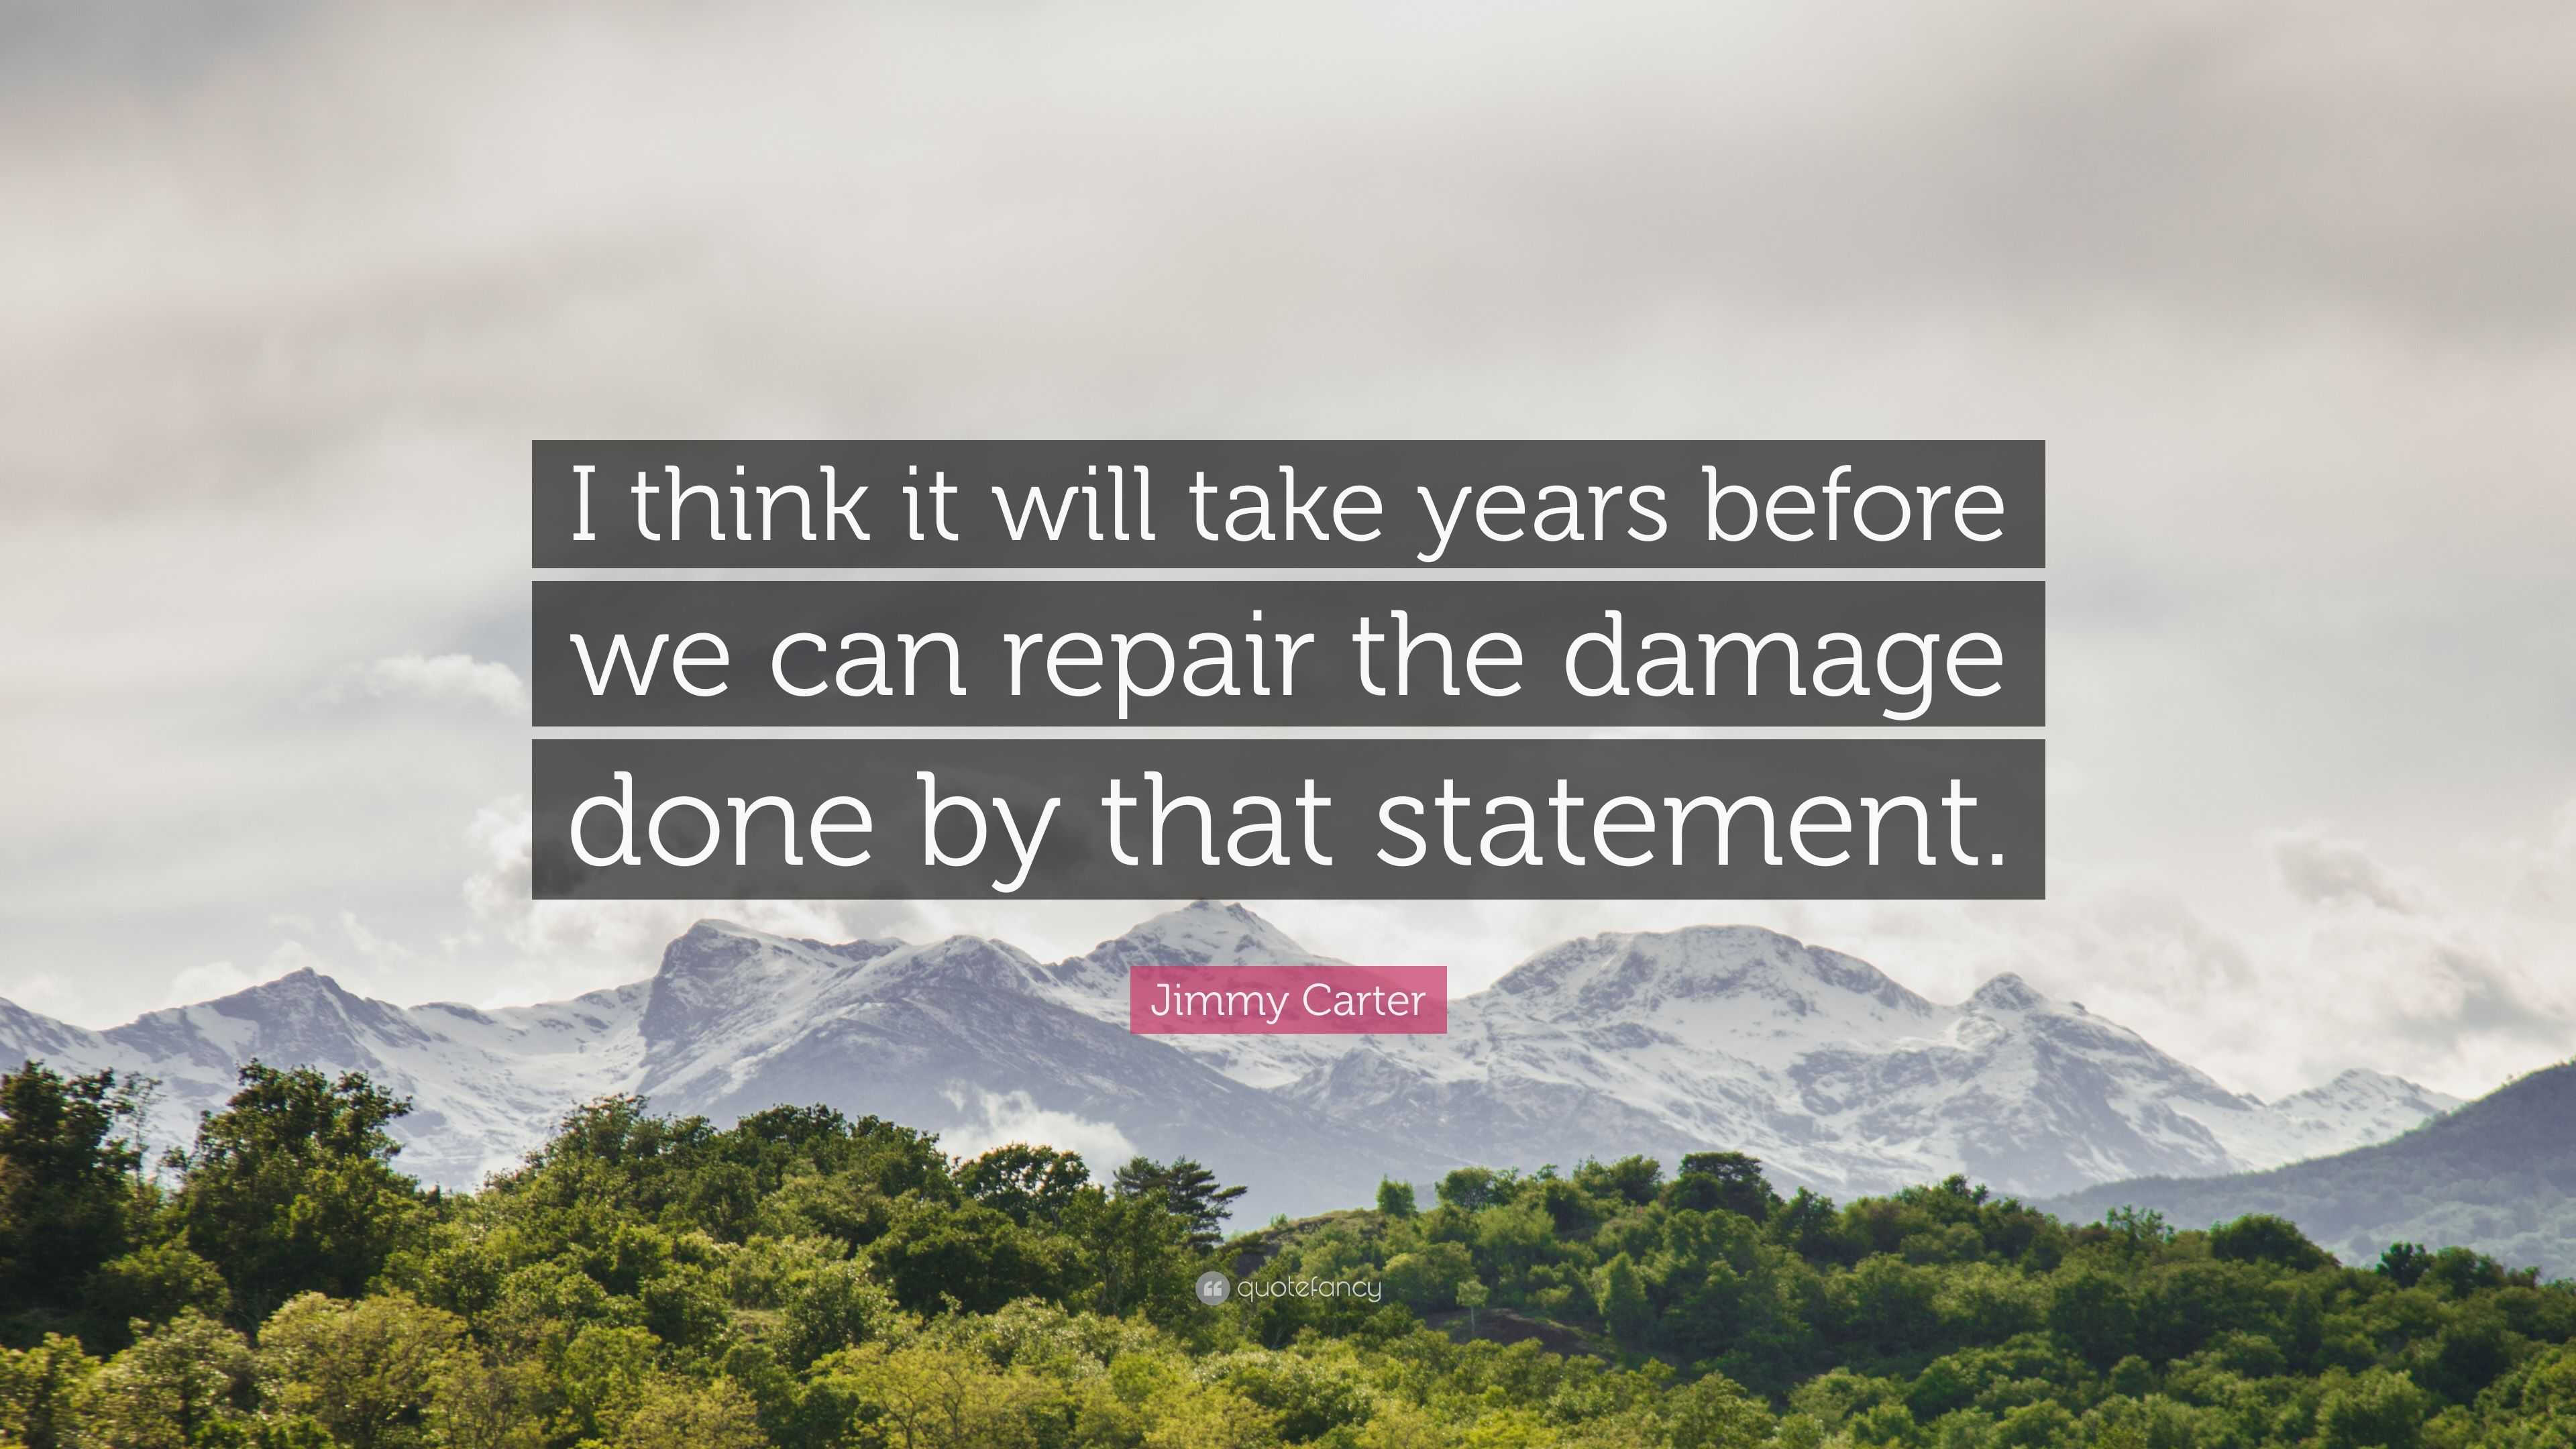 ReThink - Before the Damage is Done